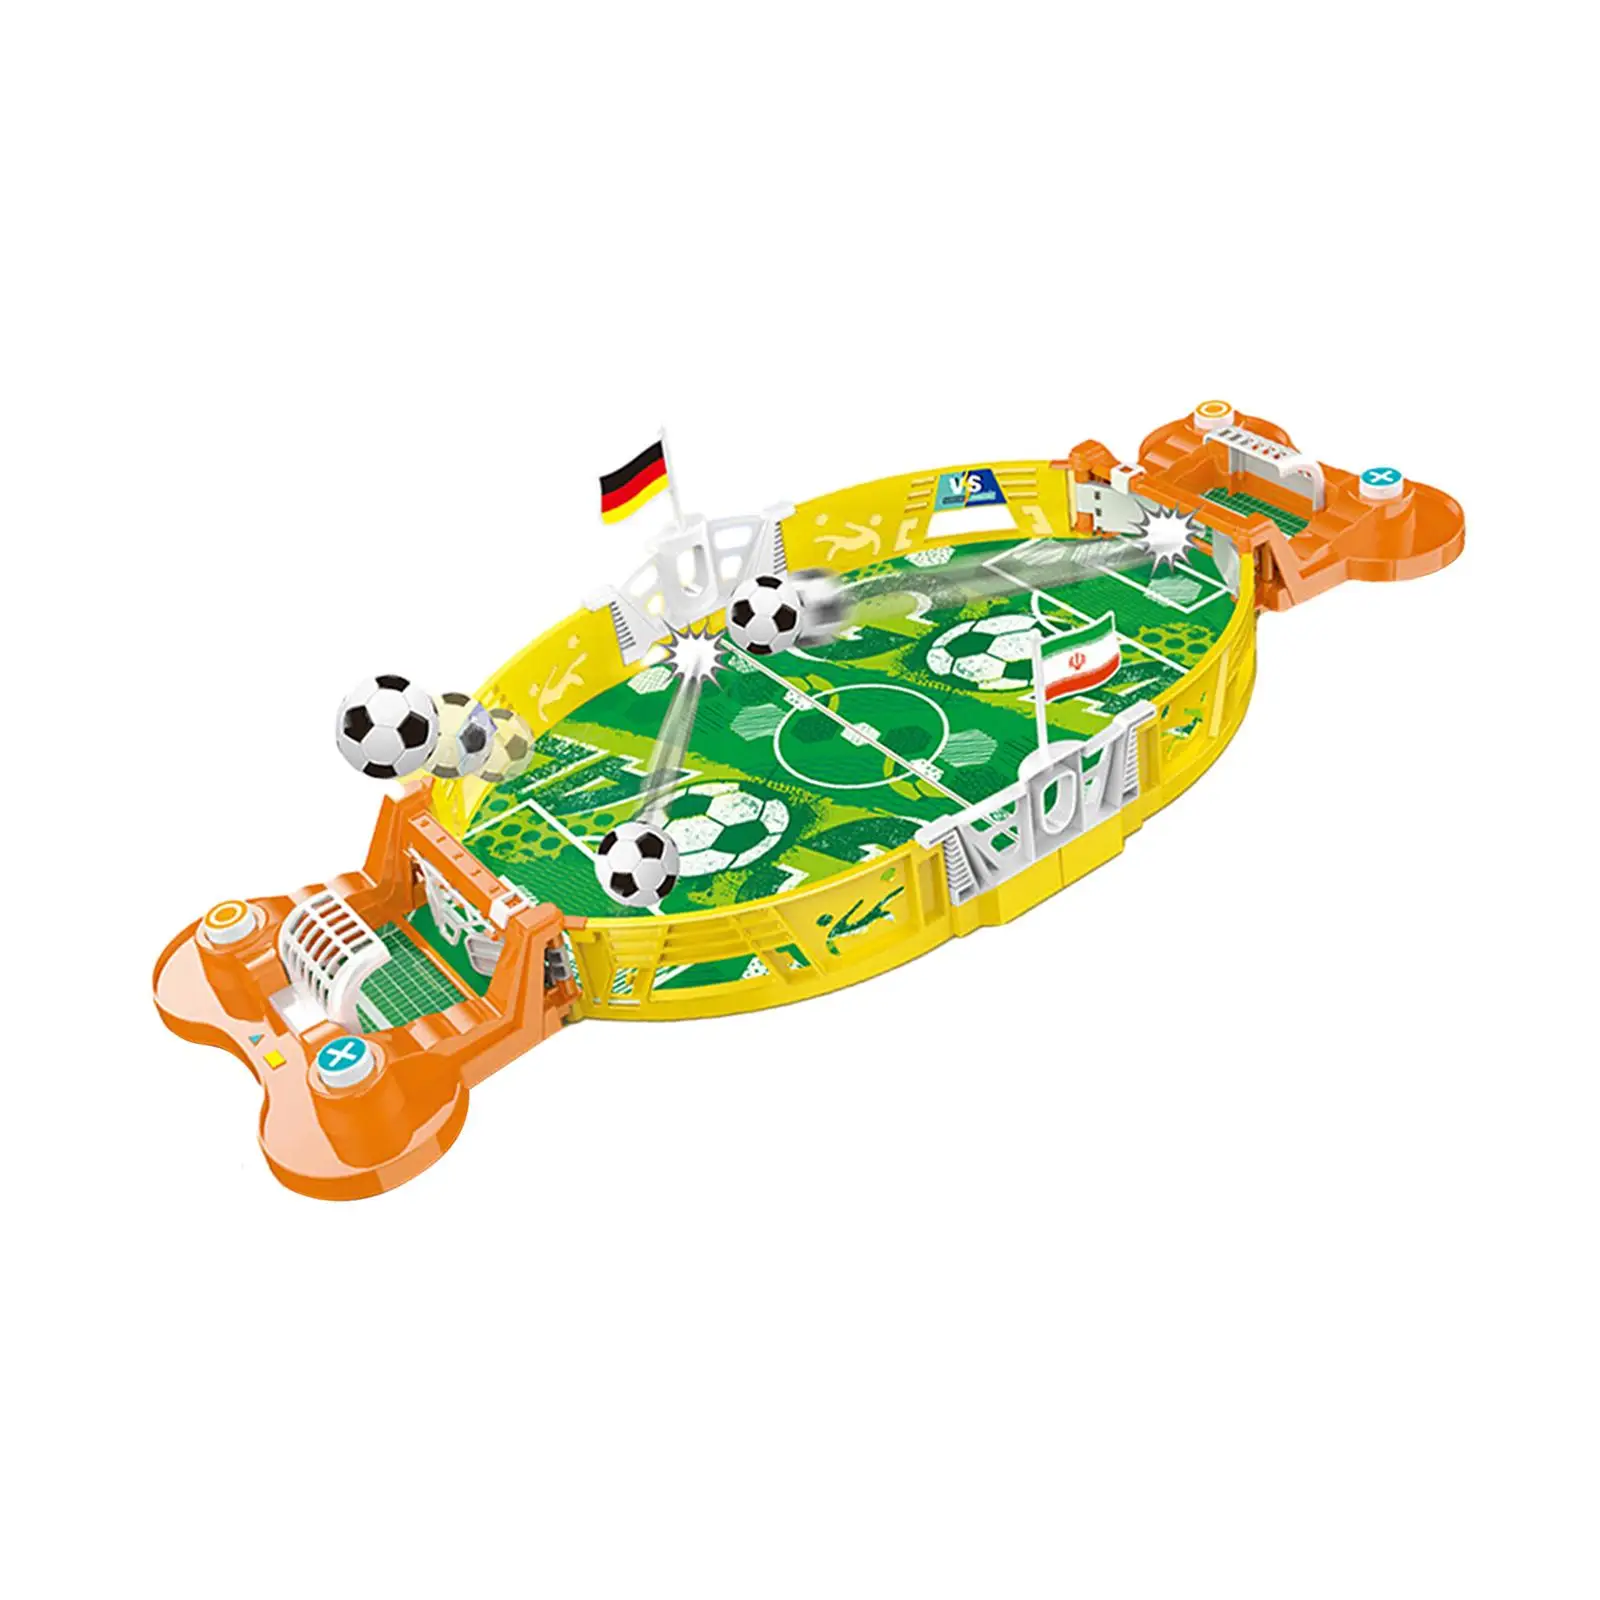 Mini Table Soccer Game Desktop Toy Tabletop Football Game Toy for Boy Girls Kids Adults Entertainment Family Game Children